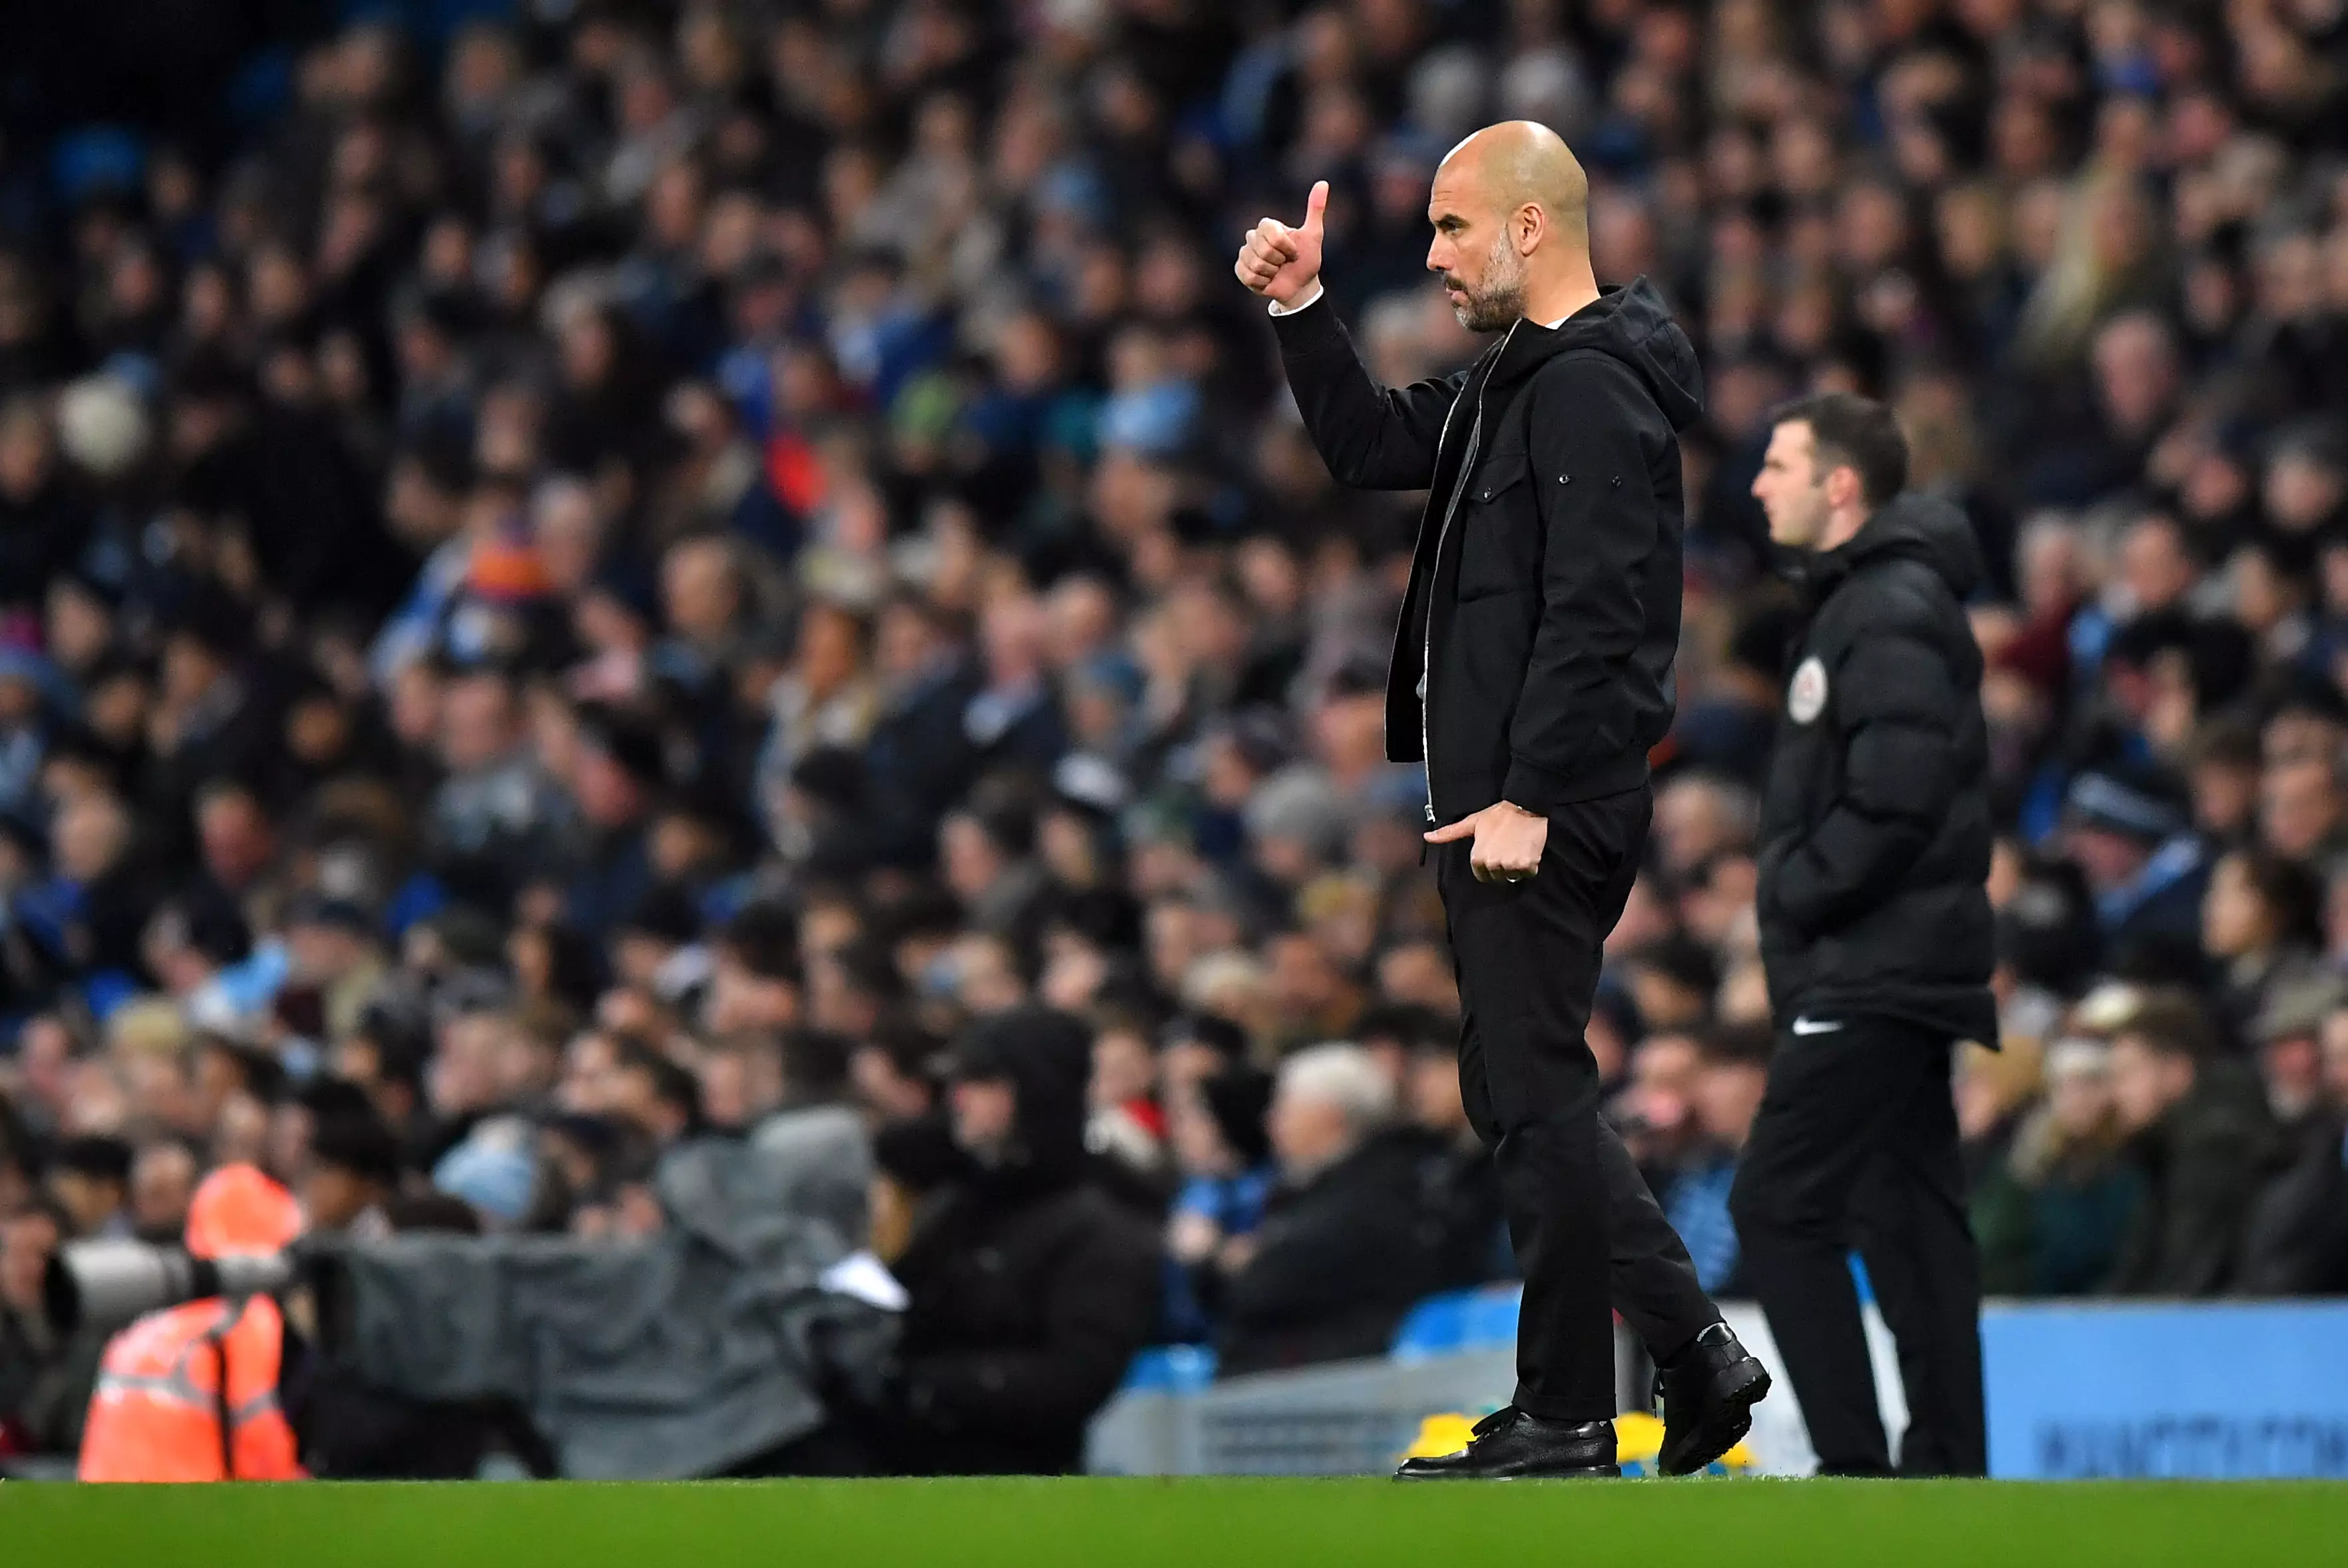 Guardiola gestures on the touchline. Image: PA